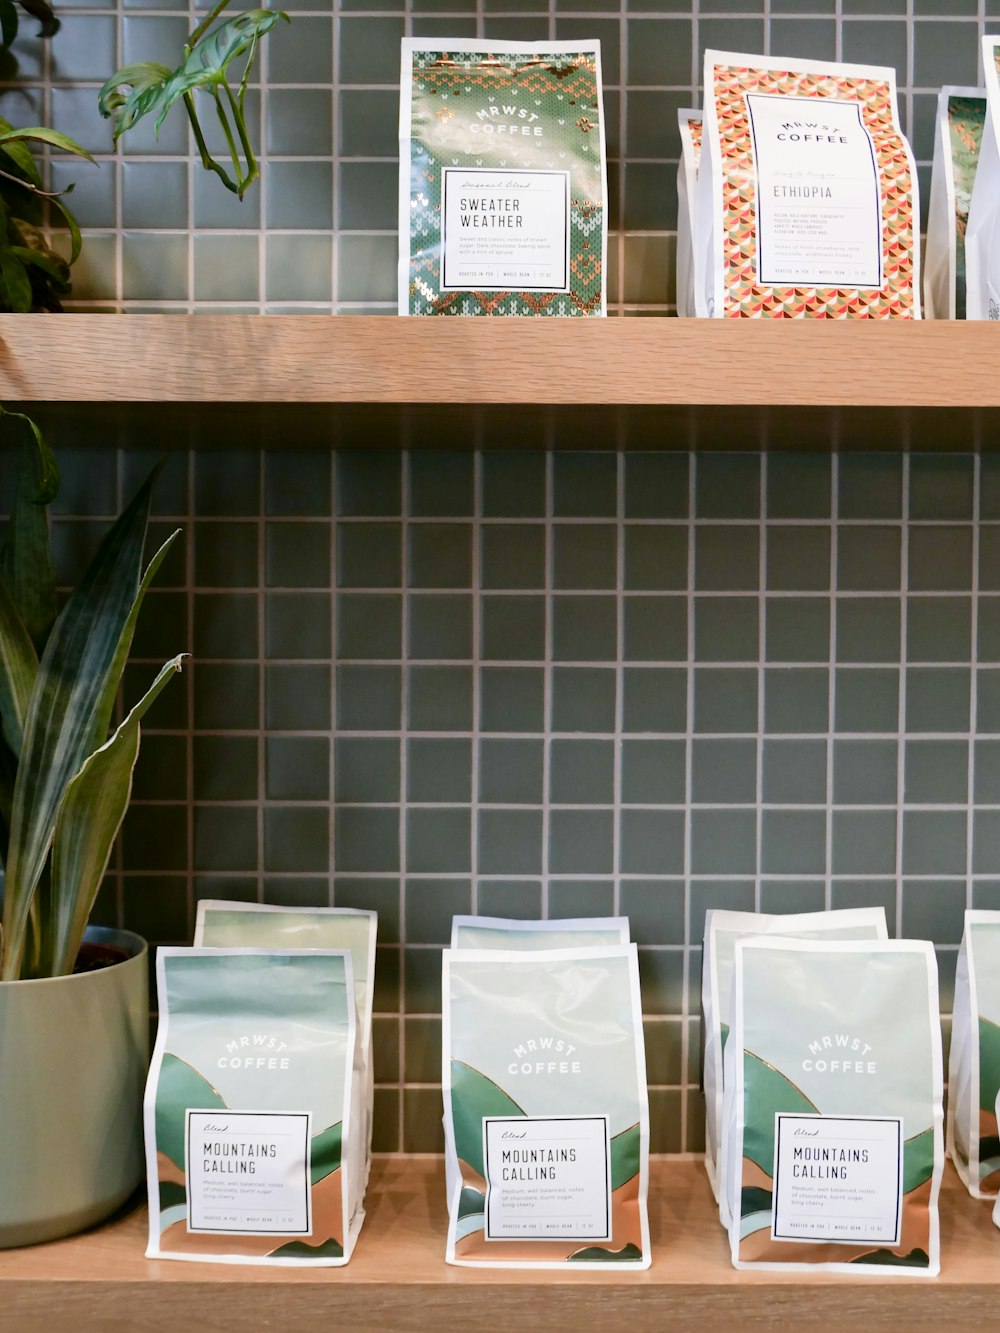 a shelf filled with coffee bags next to a potted plant